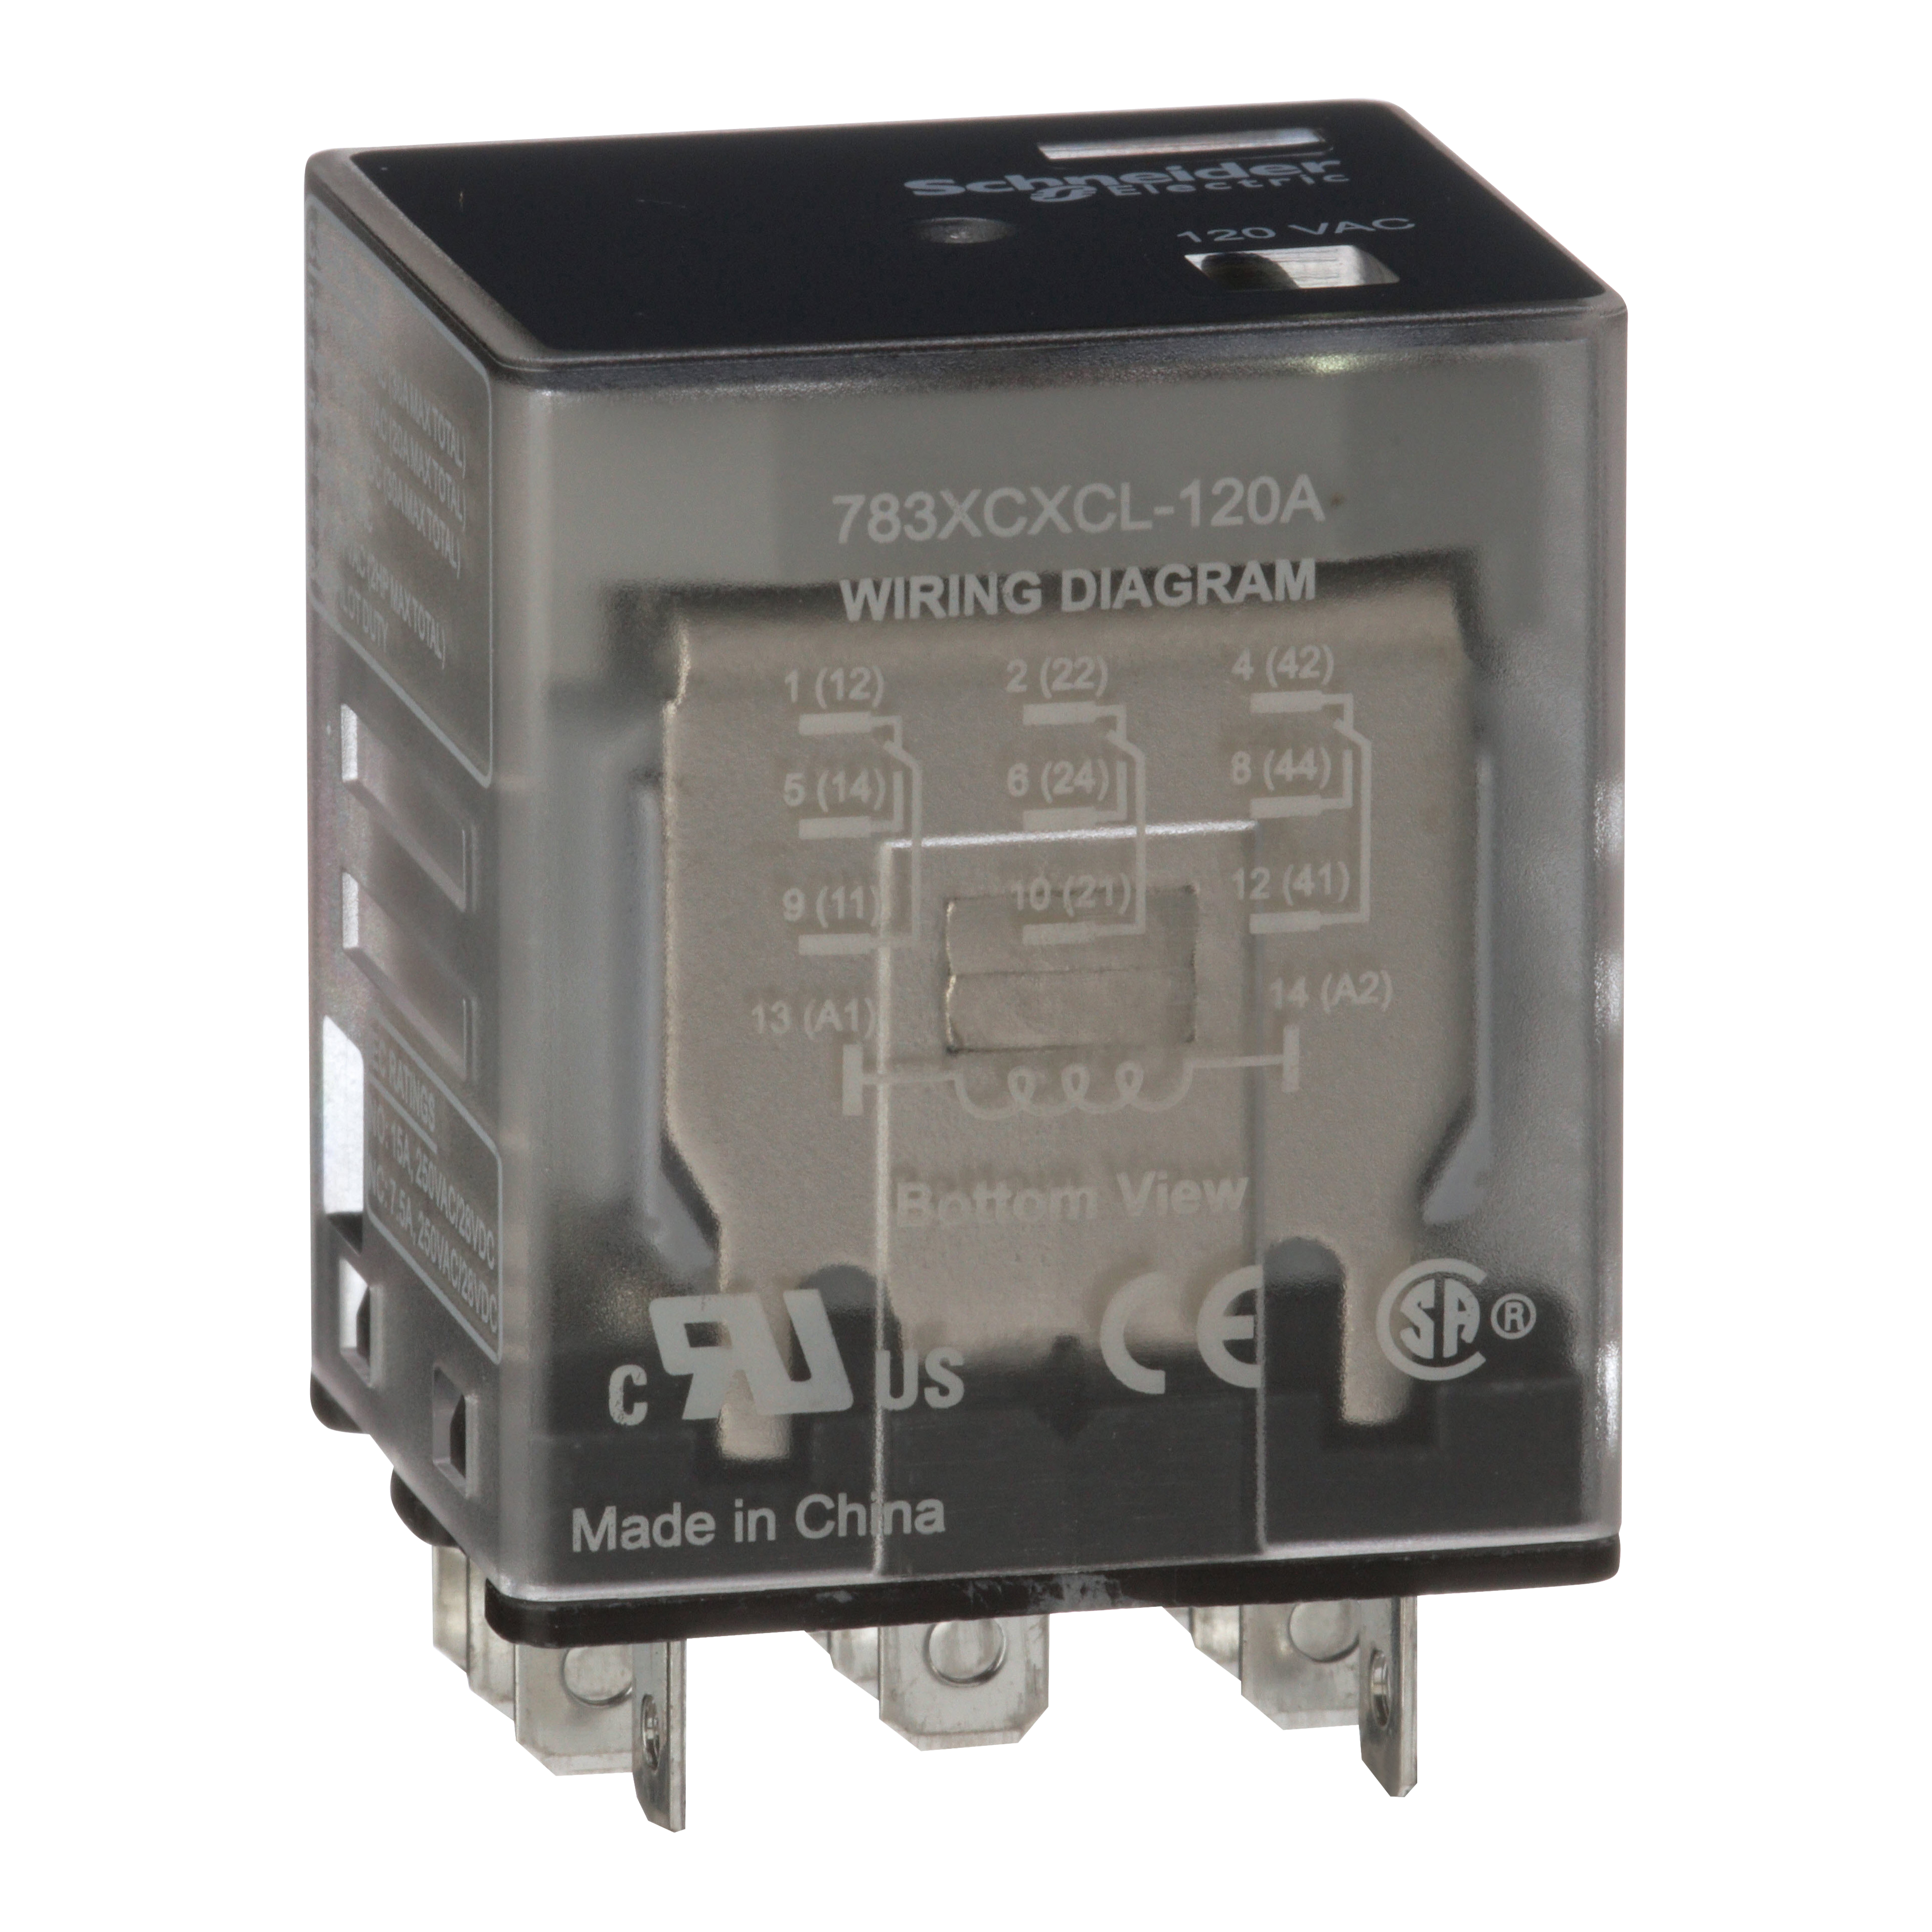 Power relay, SE Relays, 15A, 3PDT, 120 VAC, clear cover with LED indicator